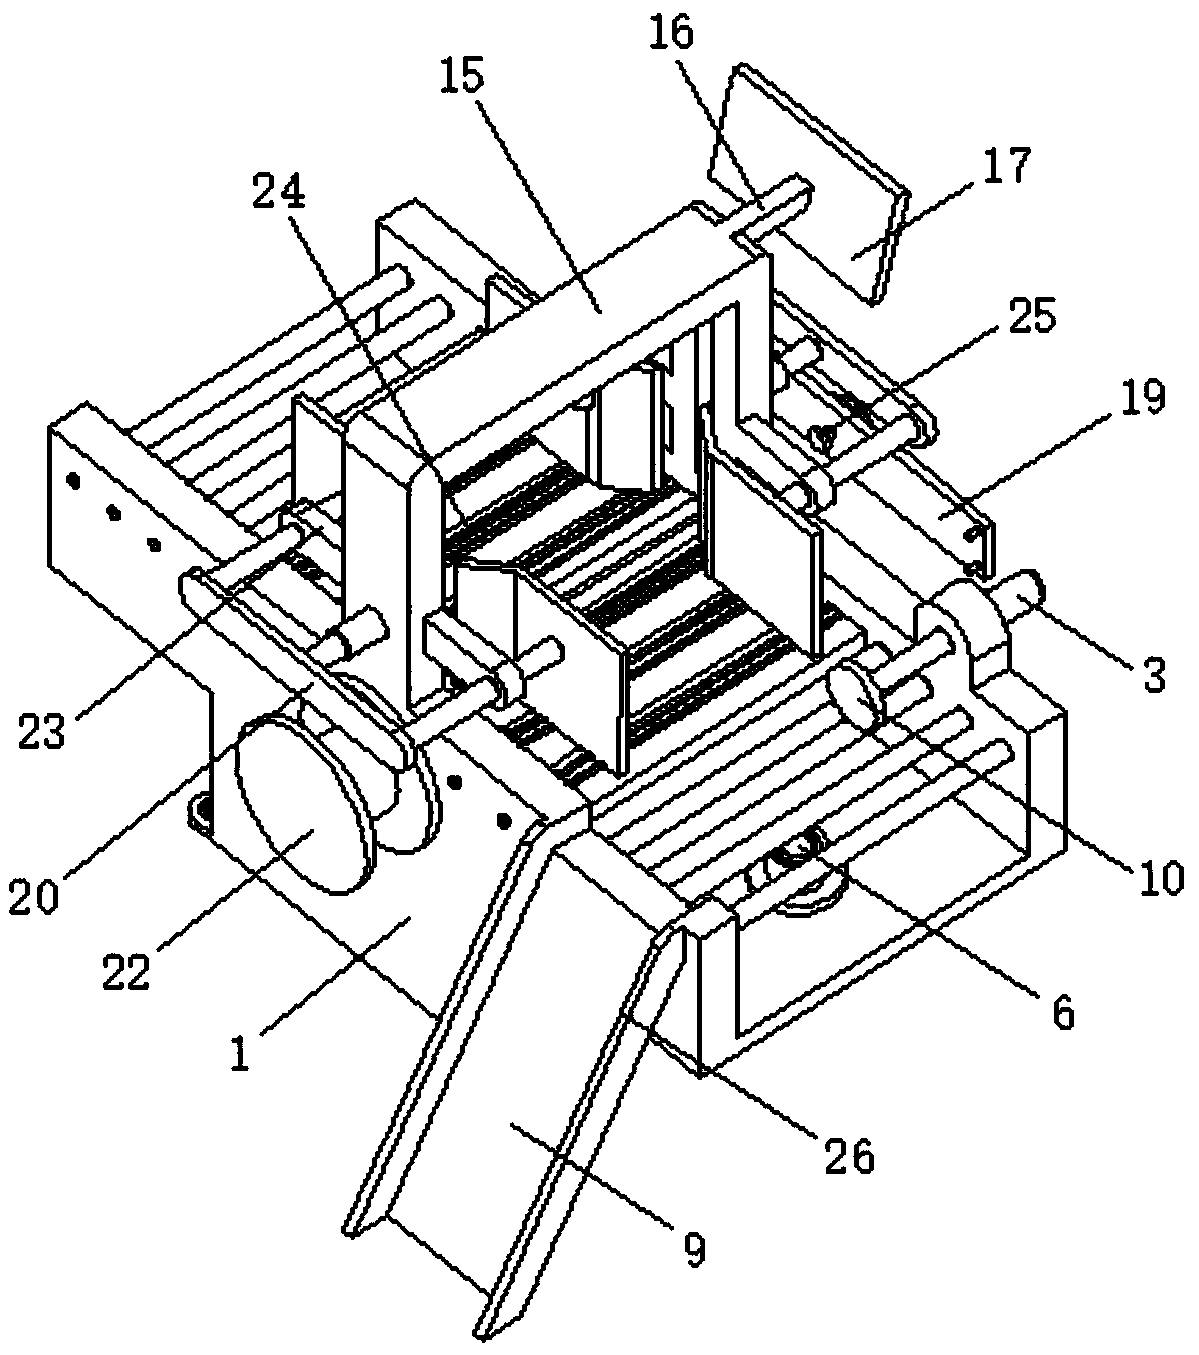 Packaging device for molding processing system of packaging cartons